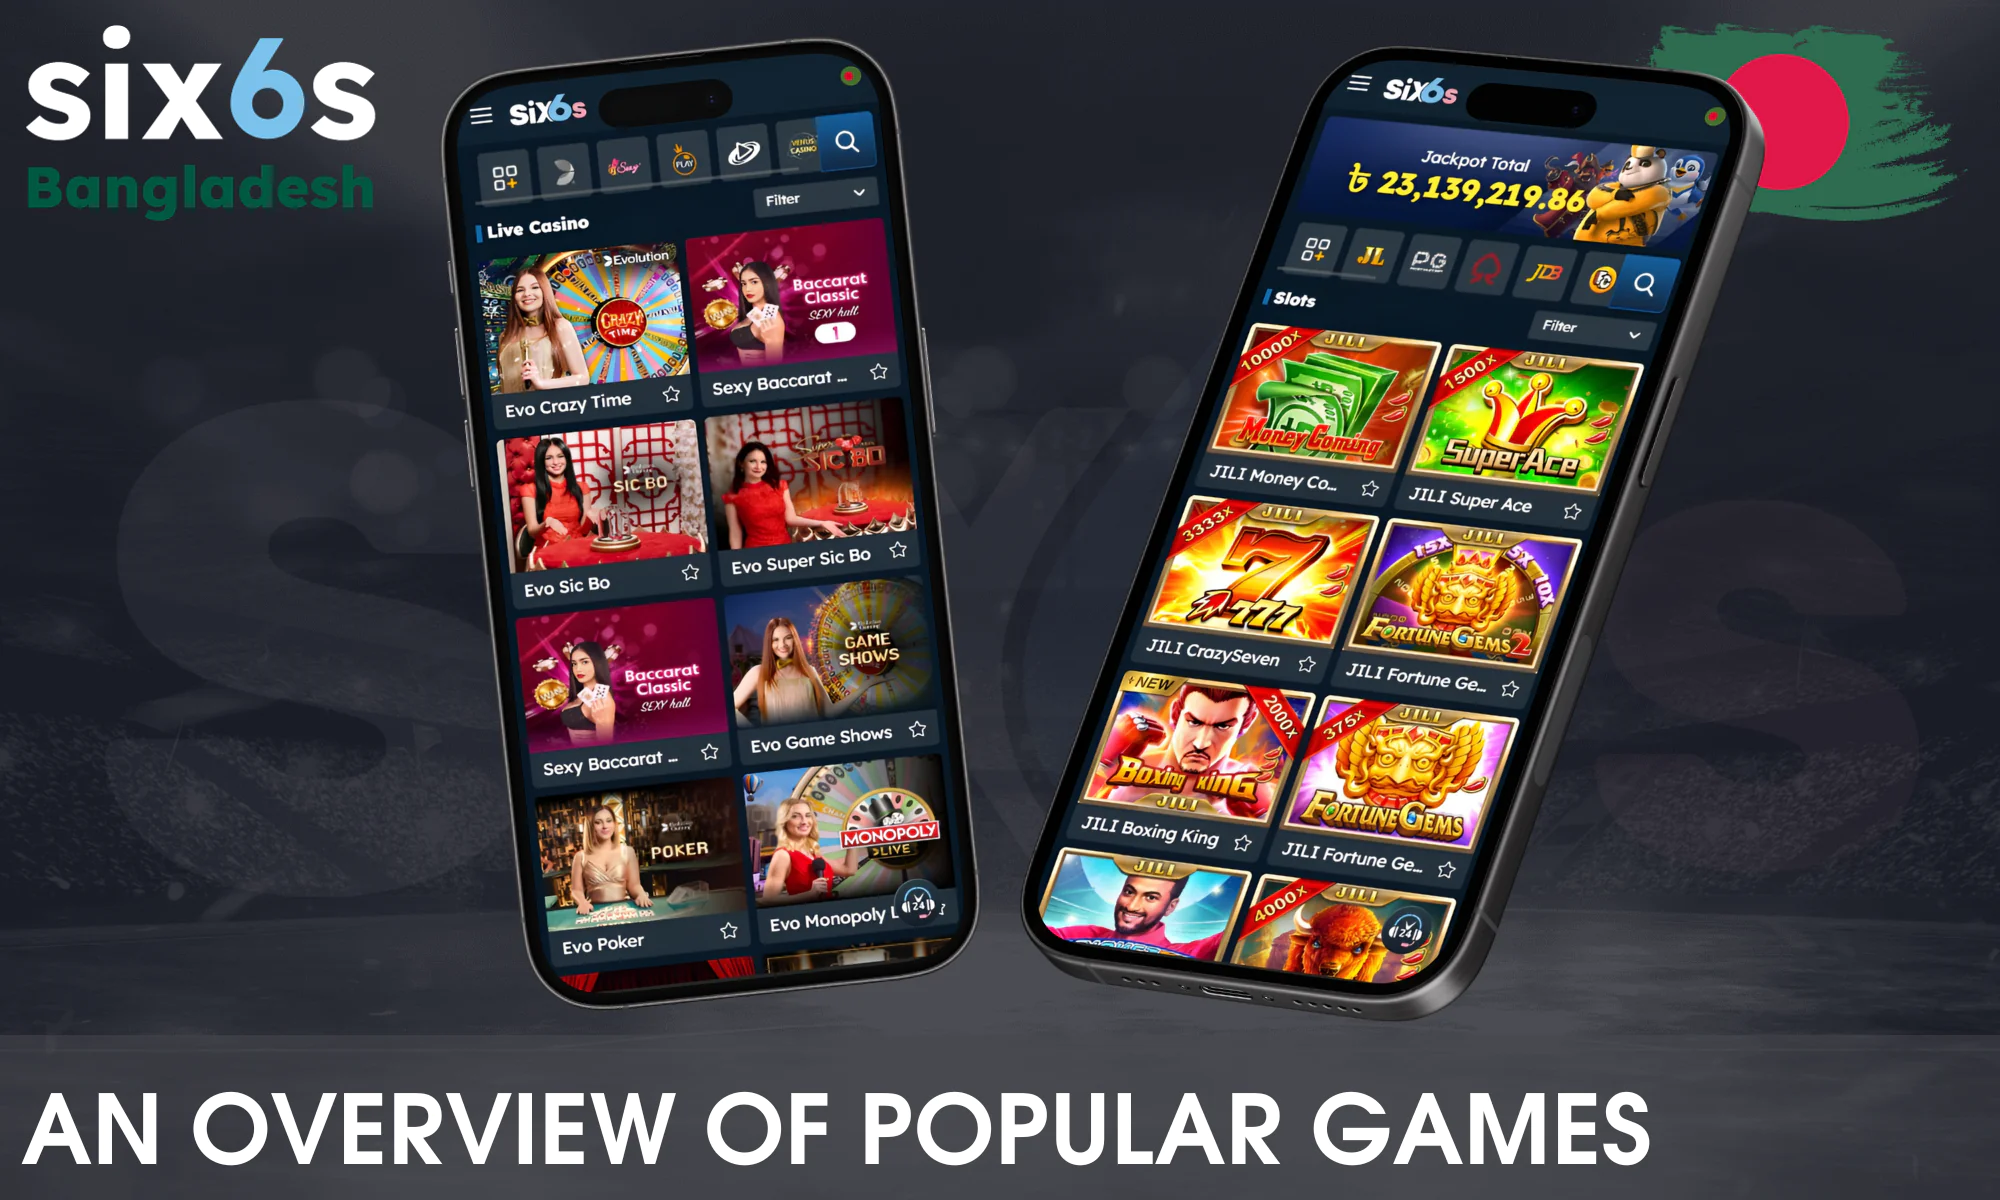 Learn more about popular games at Six6s online casino